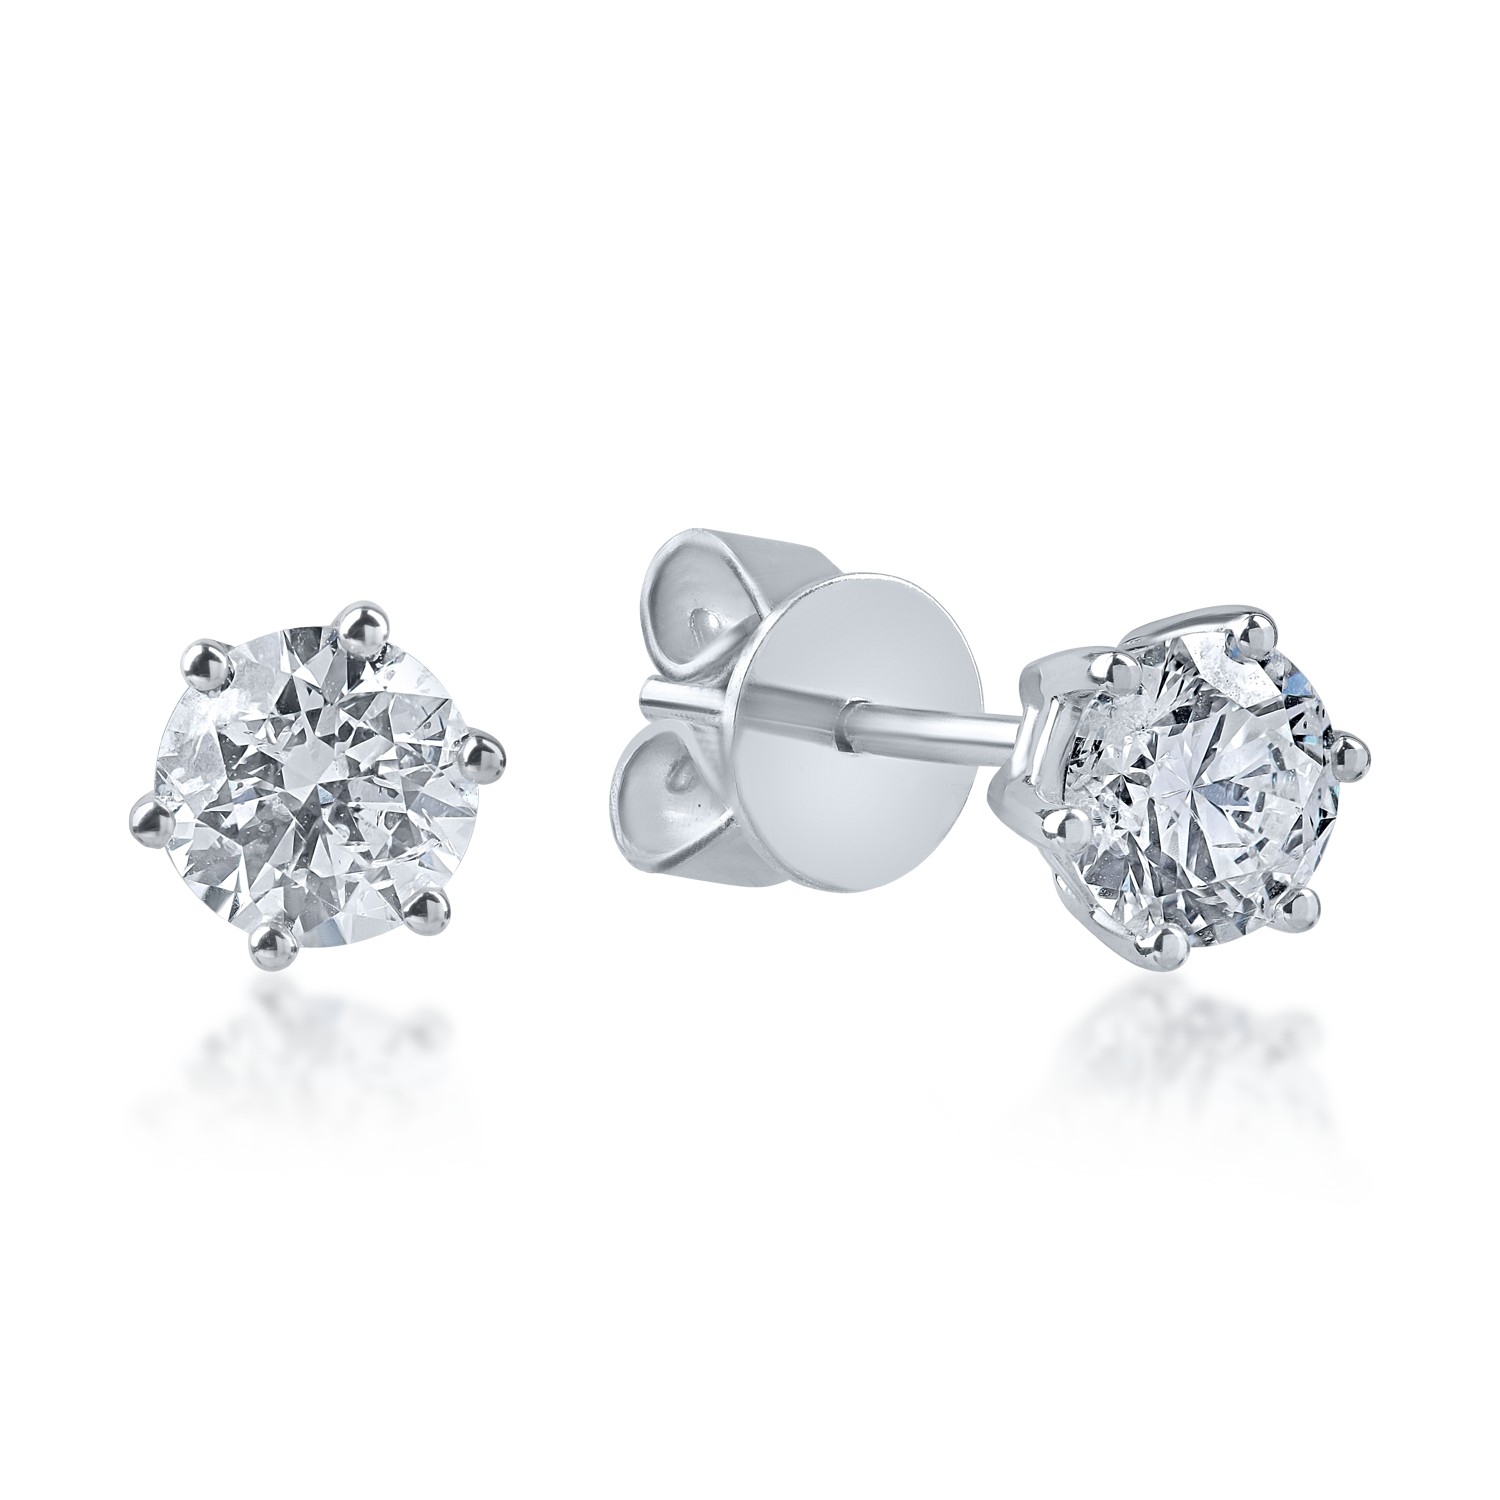 White gold earrings with 1ct solitaire diamonds